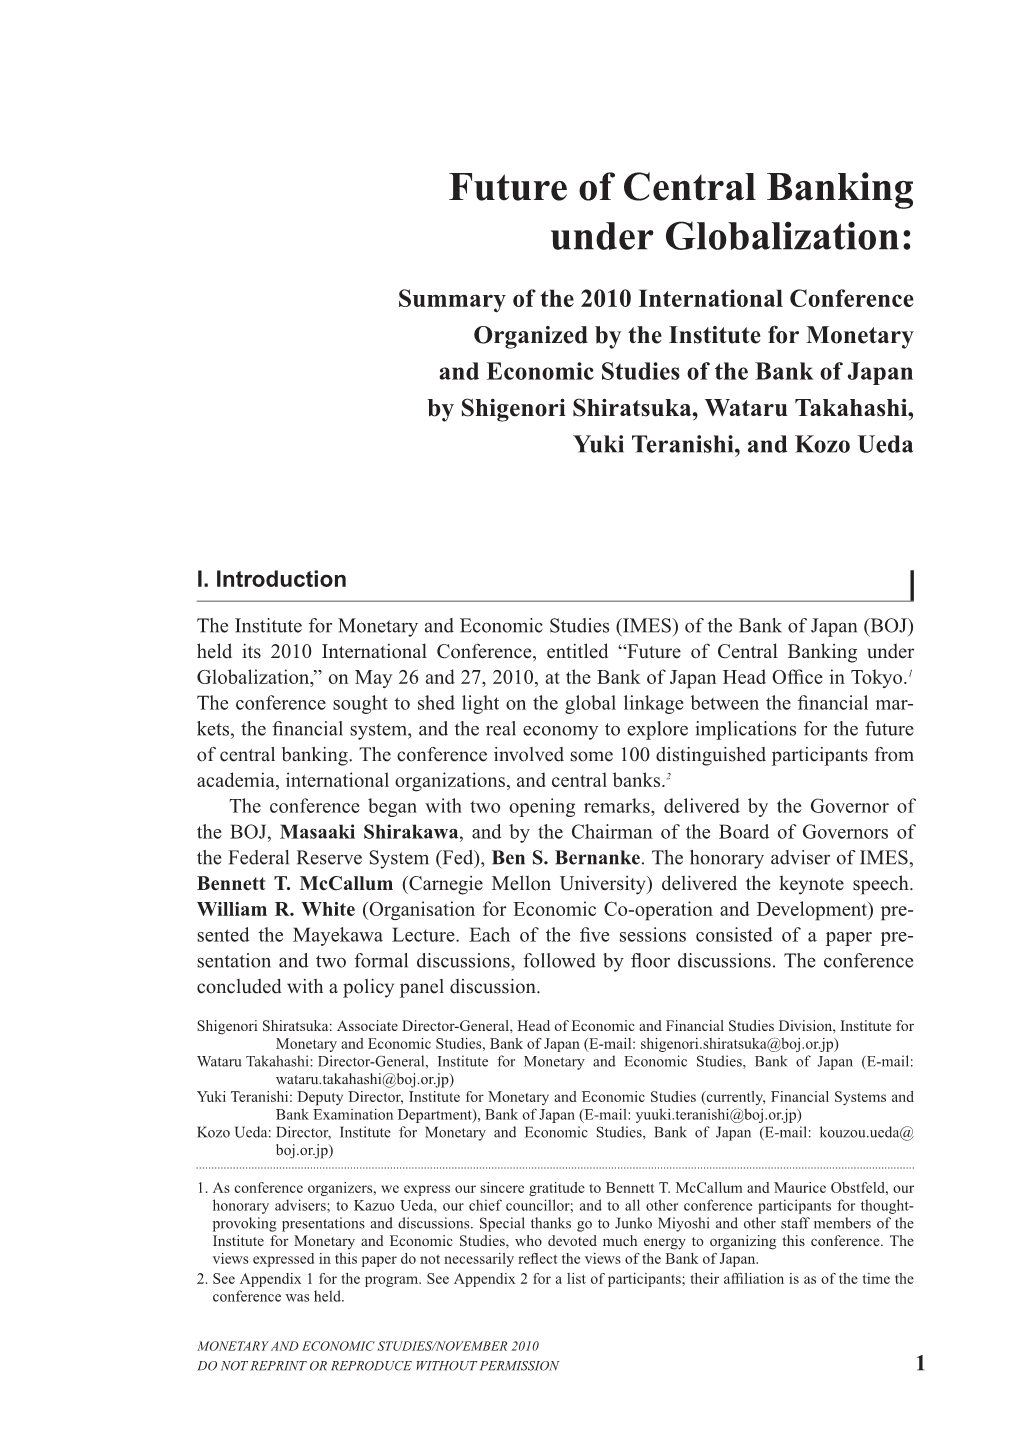 Future of Central Banking Under Globalization: Summary of the 2010